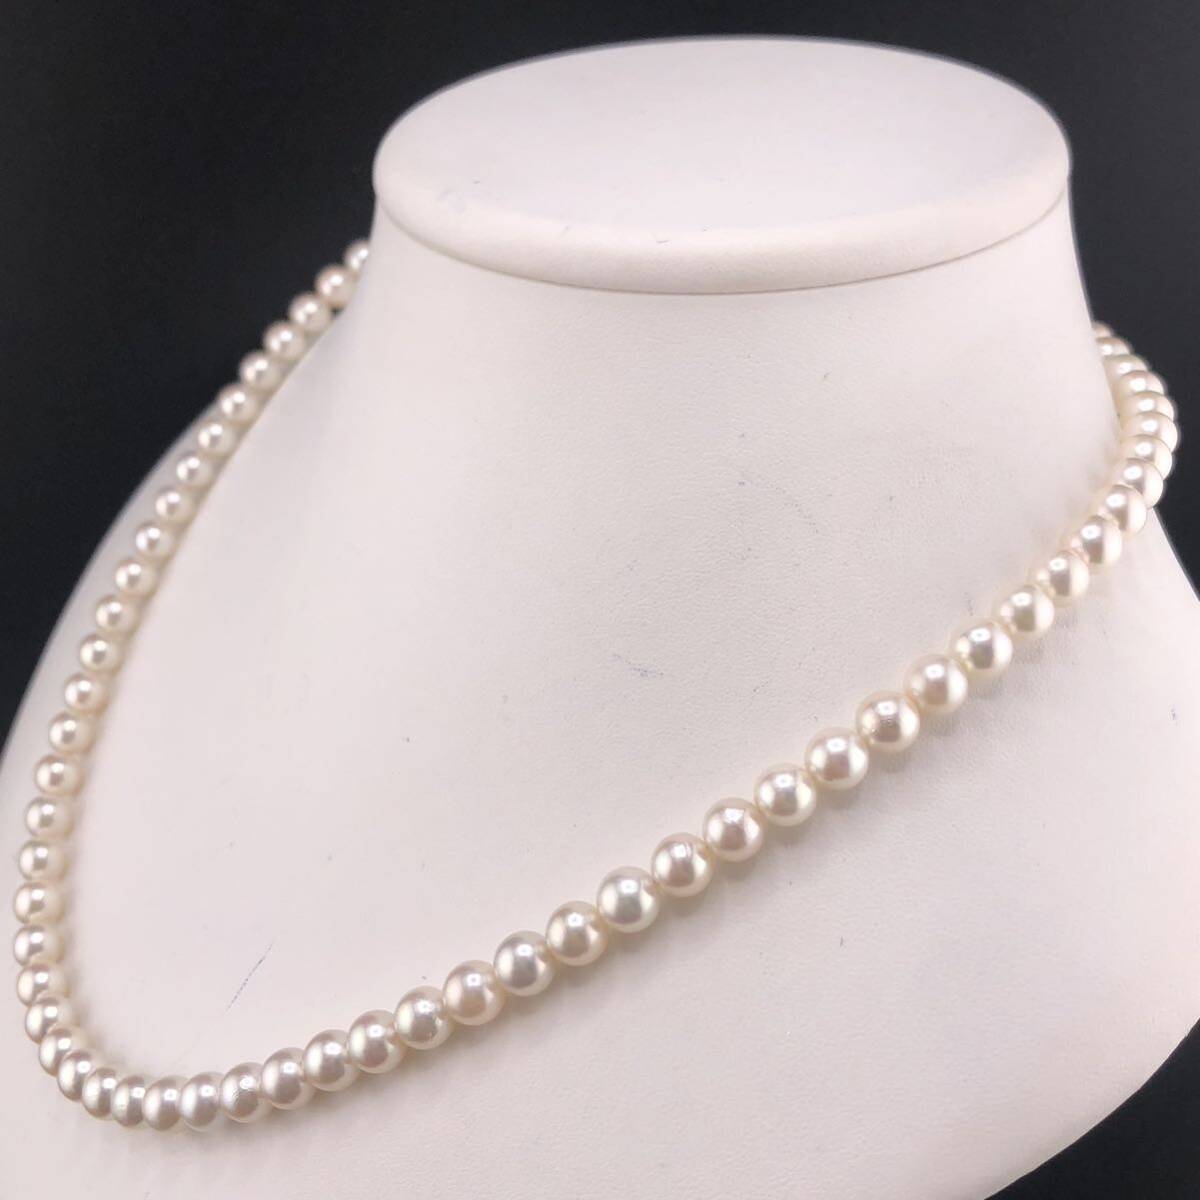 E03-6420 アコヤパールネックレス 6.5mm~7.0mm 49cm 33.8g ( アコヤ真珠 Pearl necklace SILVER )の画像2